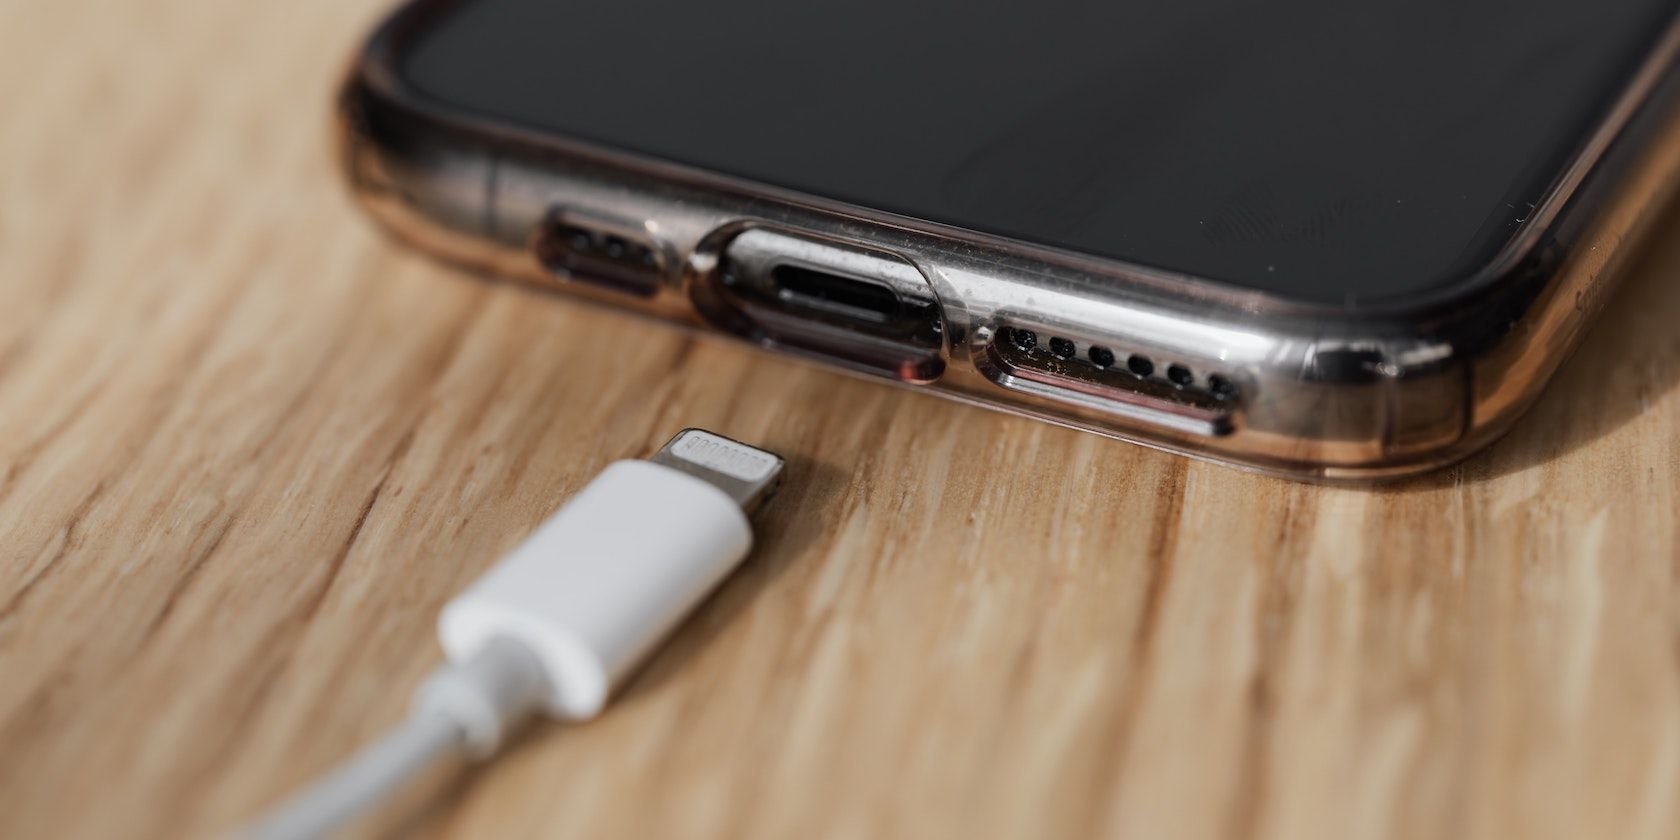 A lightning cable sits just below an iPhone, about to be put in